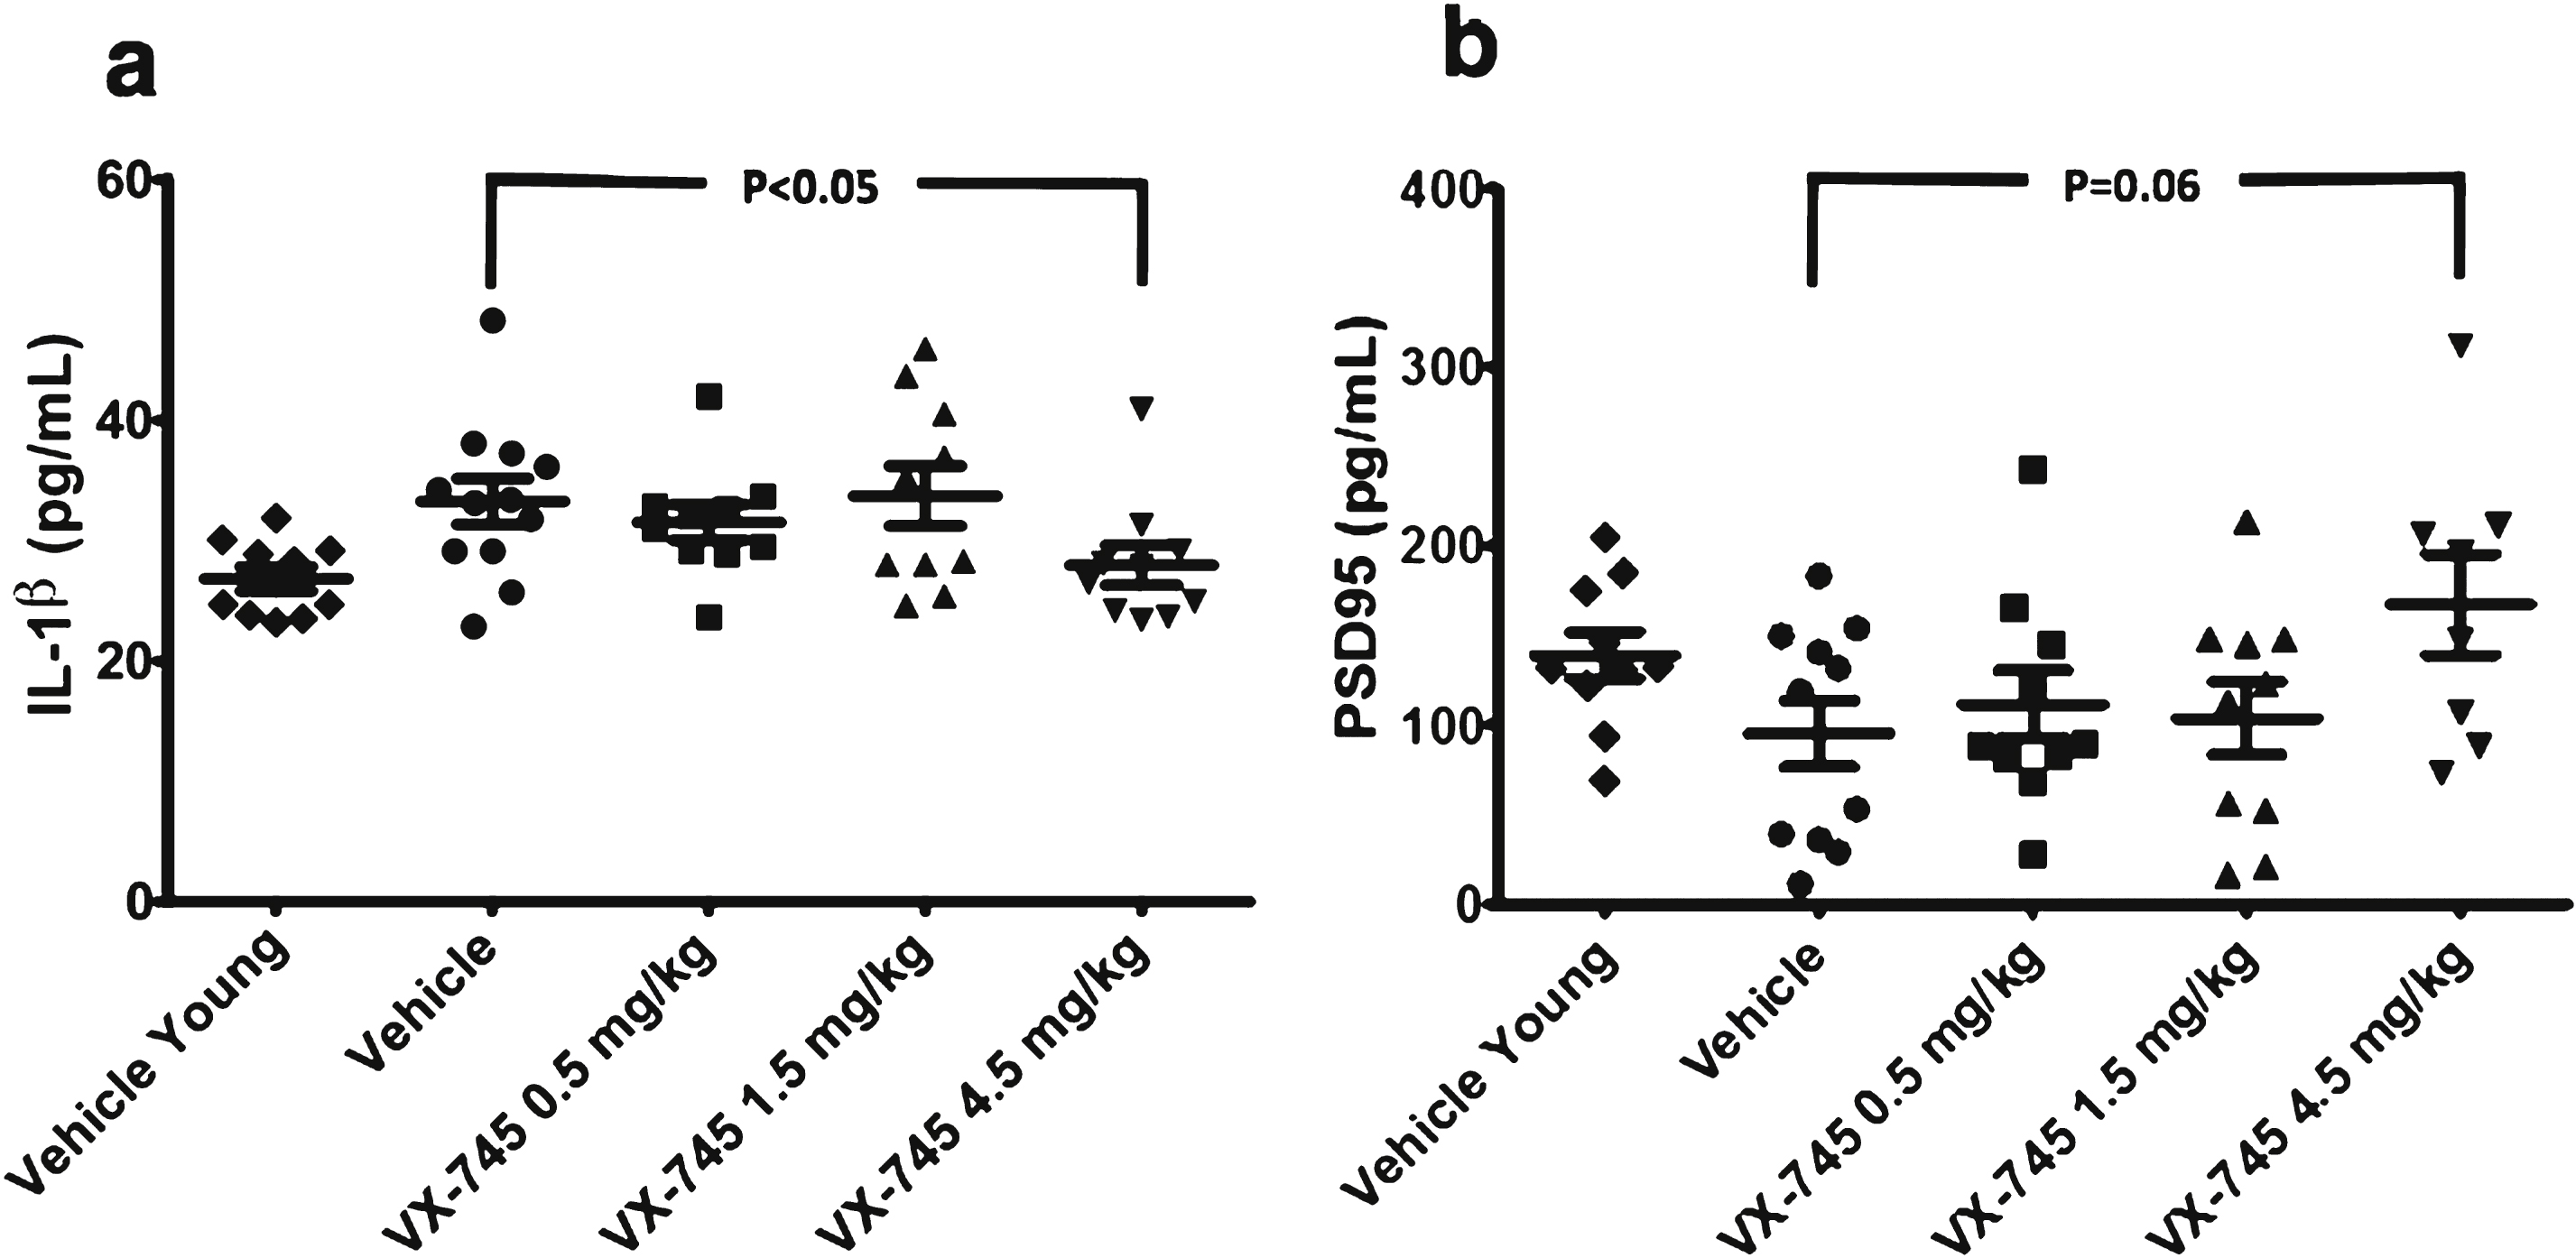 Protein levels of IL-1β (a) and PSD95 (b) in hippocampal homogenate. Obtained at sacrifice at end of treatment in vehicle-treated young rats and aged rats treated with vehicle or 0.5, 1.5, or 4.5 mg/kg of VX-745. 4.5 mg/kg VX-745 demonstrated significantly reduced IL-1β levels (p = 0.038 by Mann-Whitney rank sum test) and a trend toward increased PSD95 levels (p = 0.06) compared to vehicle-treated aged rats.